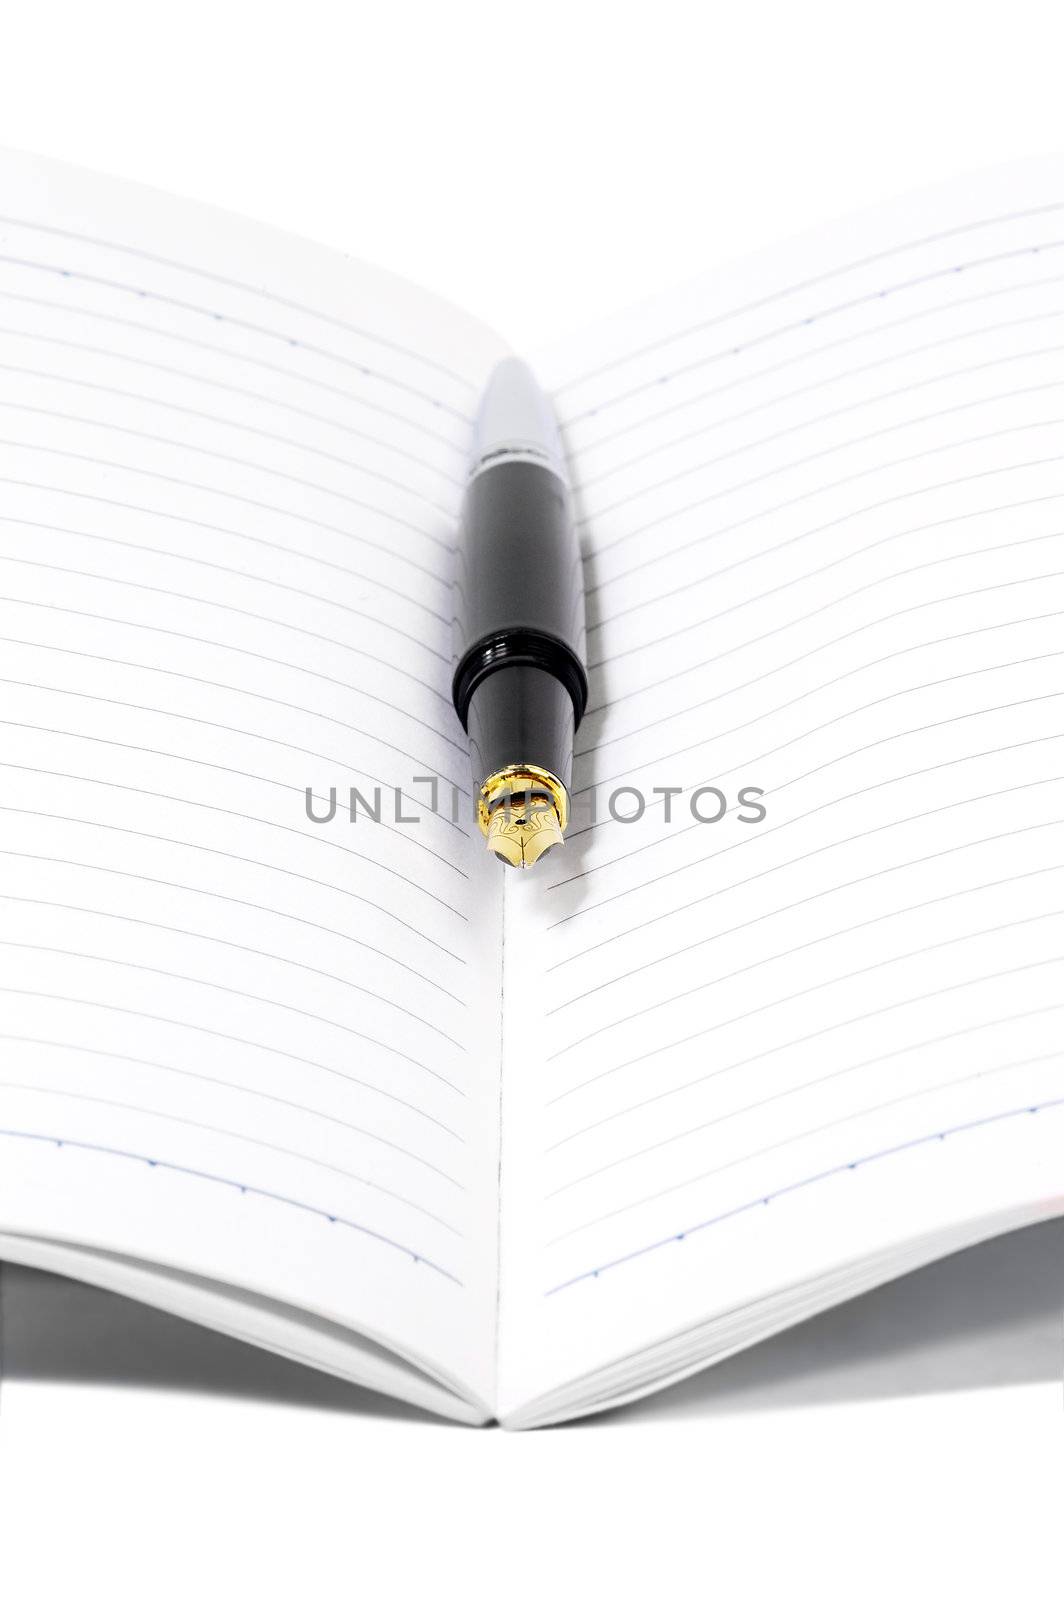 fountain pen and notebook by keko64